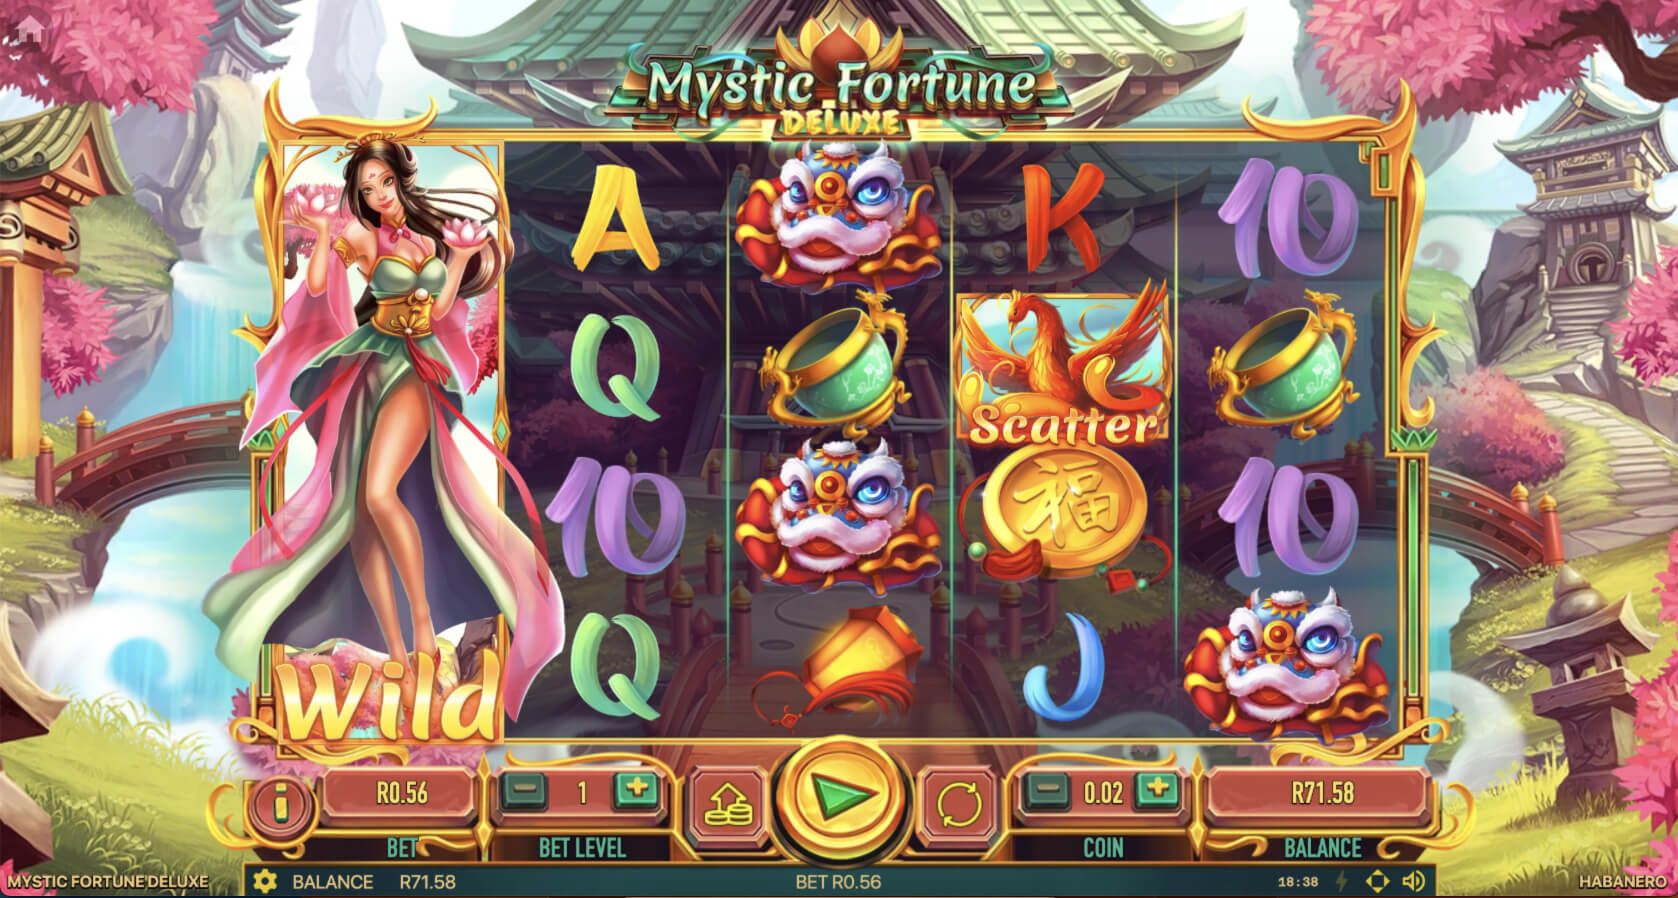 Mystic Fortune Deluxe Features Galore! (Still chasing that big win)